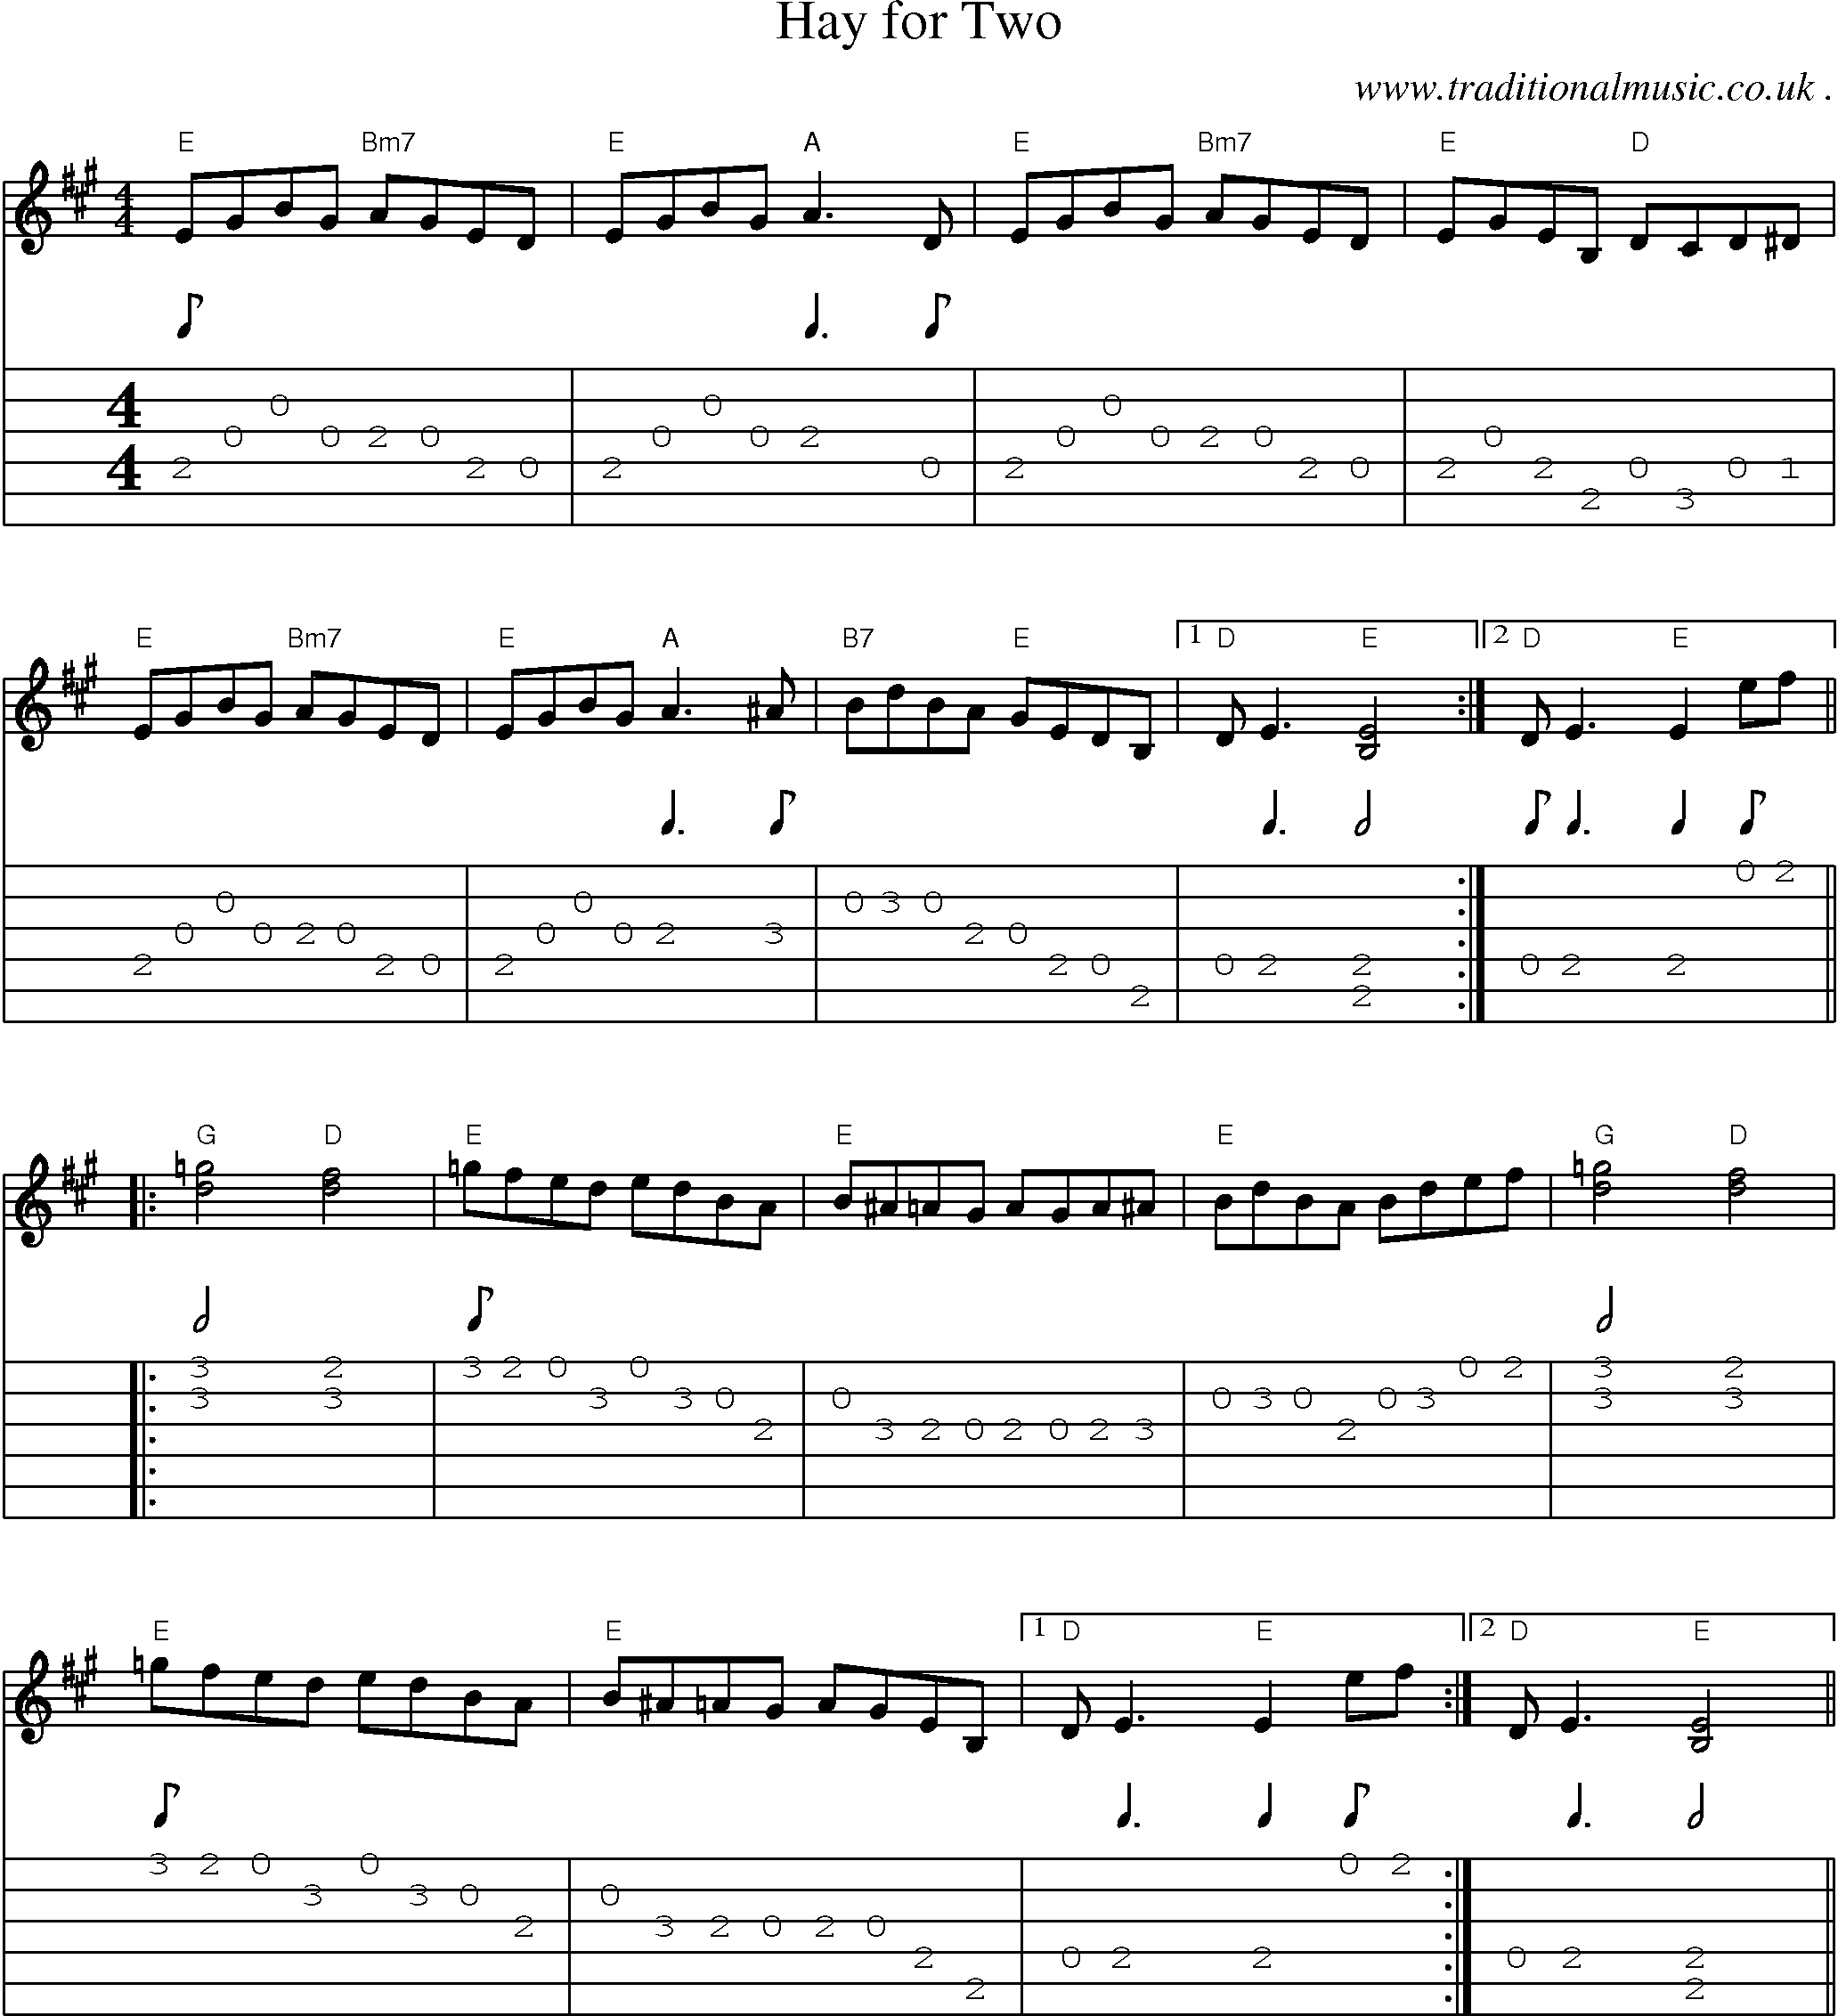 Music Score and Guitar Tabs for Hay For Two